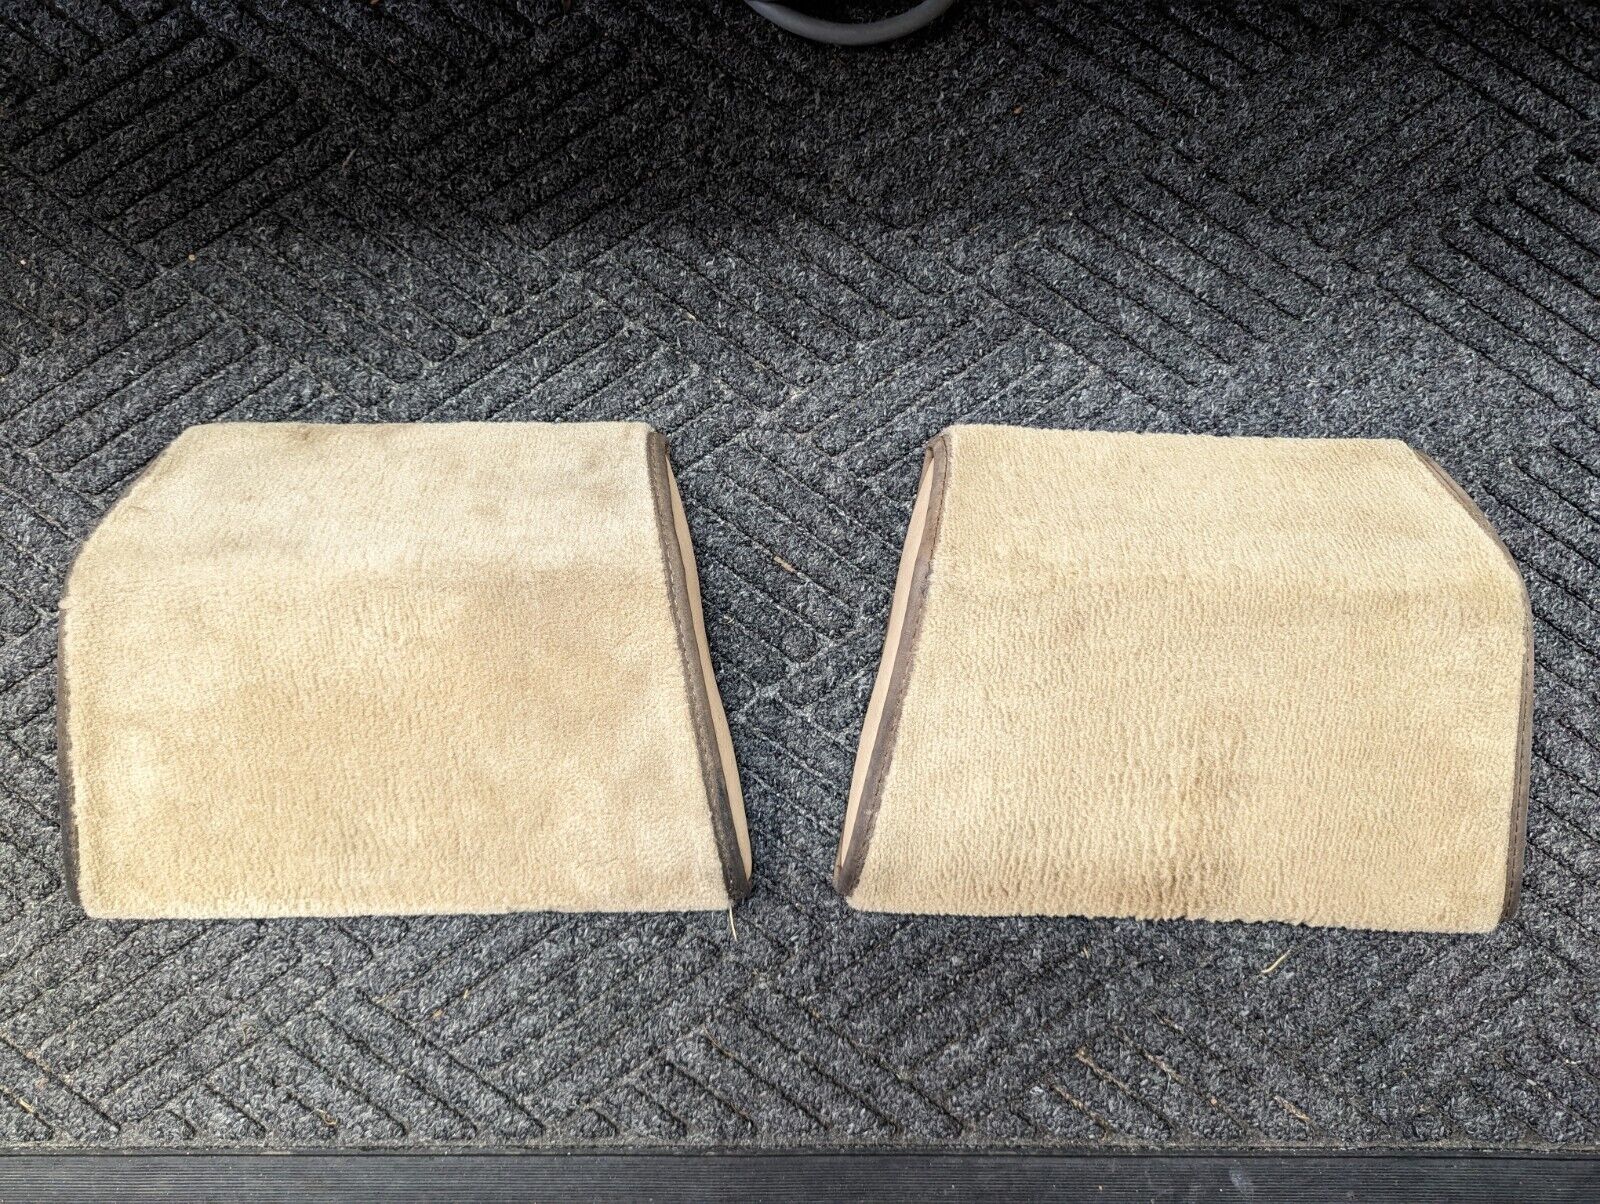 BMW E38 740iL Foot Rests Sand Beige